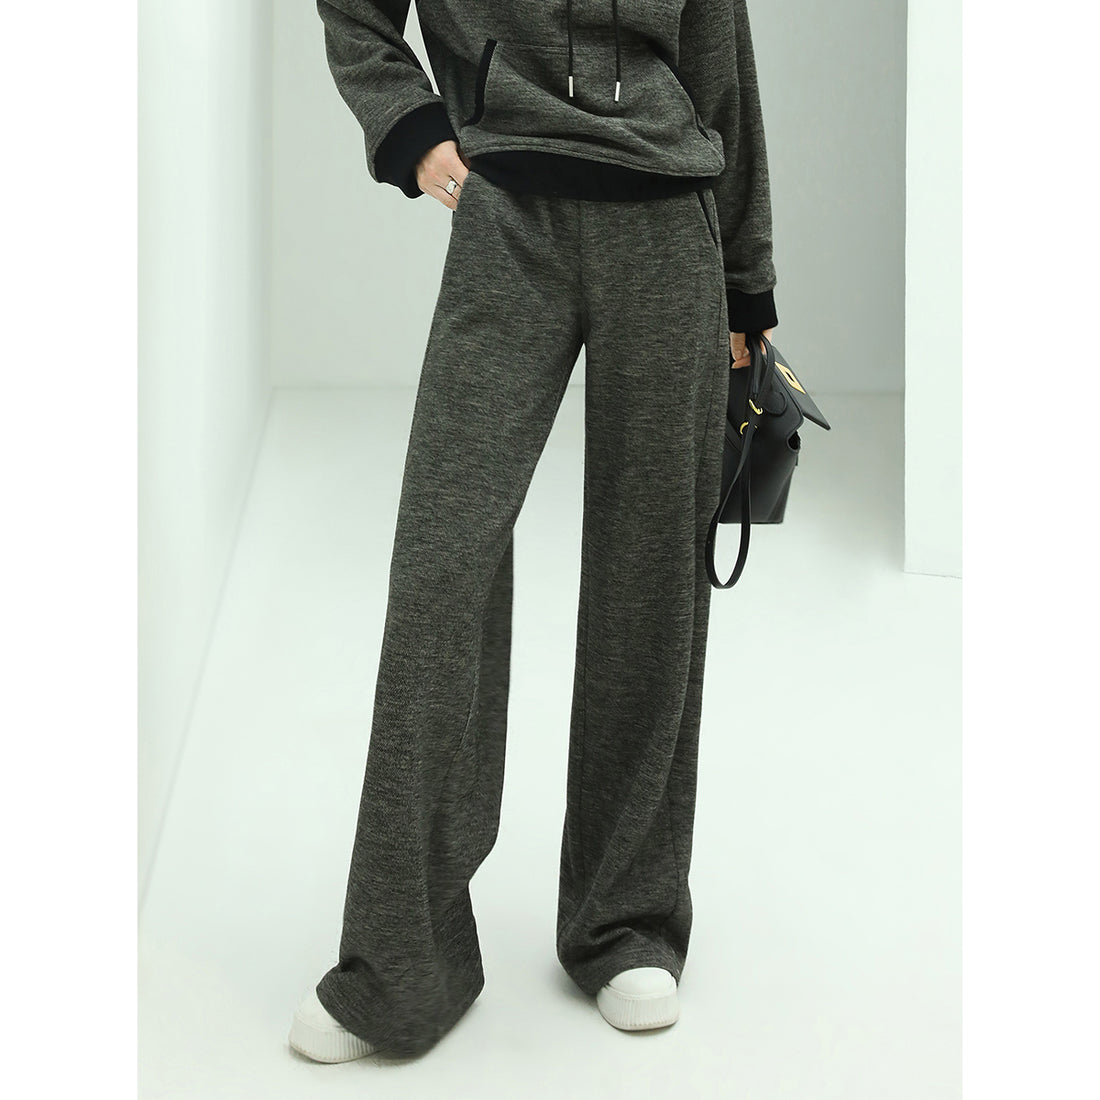 casual-knitted-pants-with-side-pockets-in-charcoal_all_charcoal_1.jpg